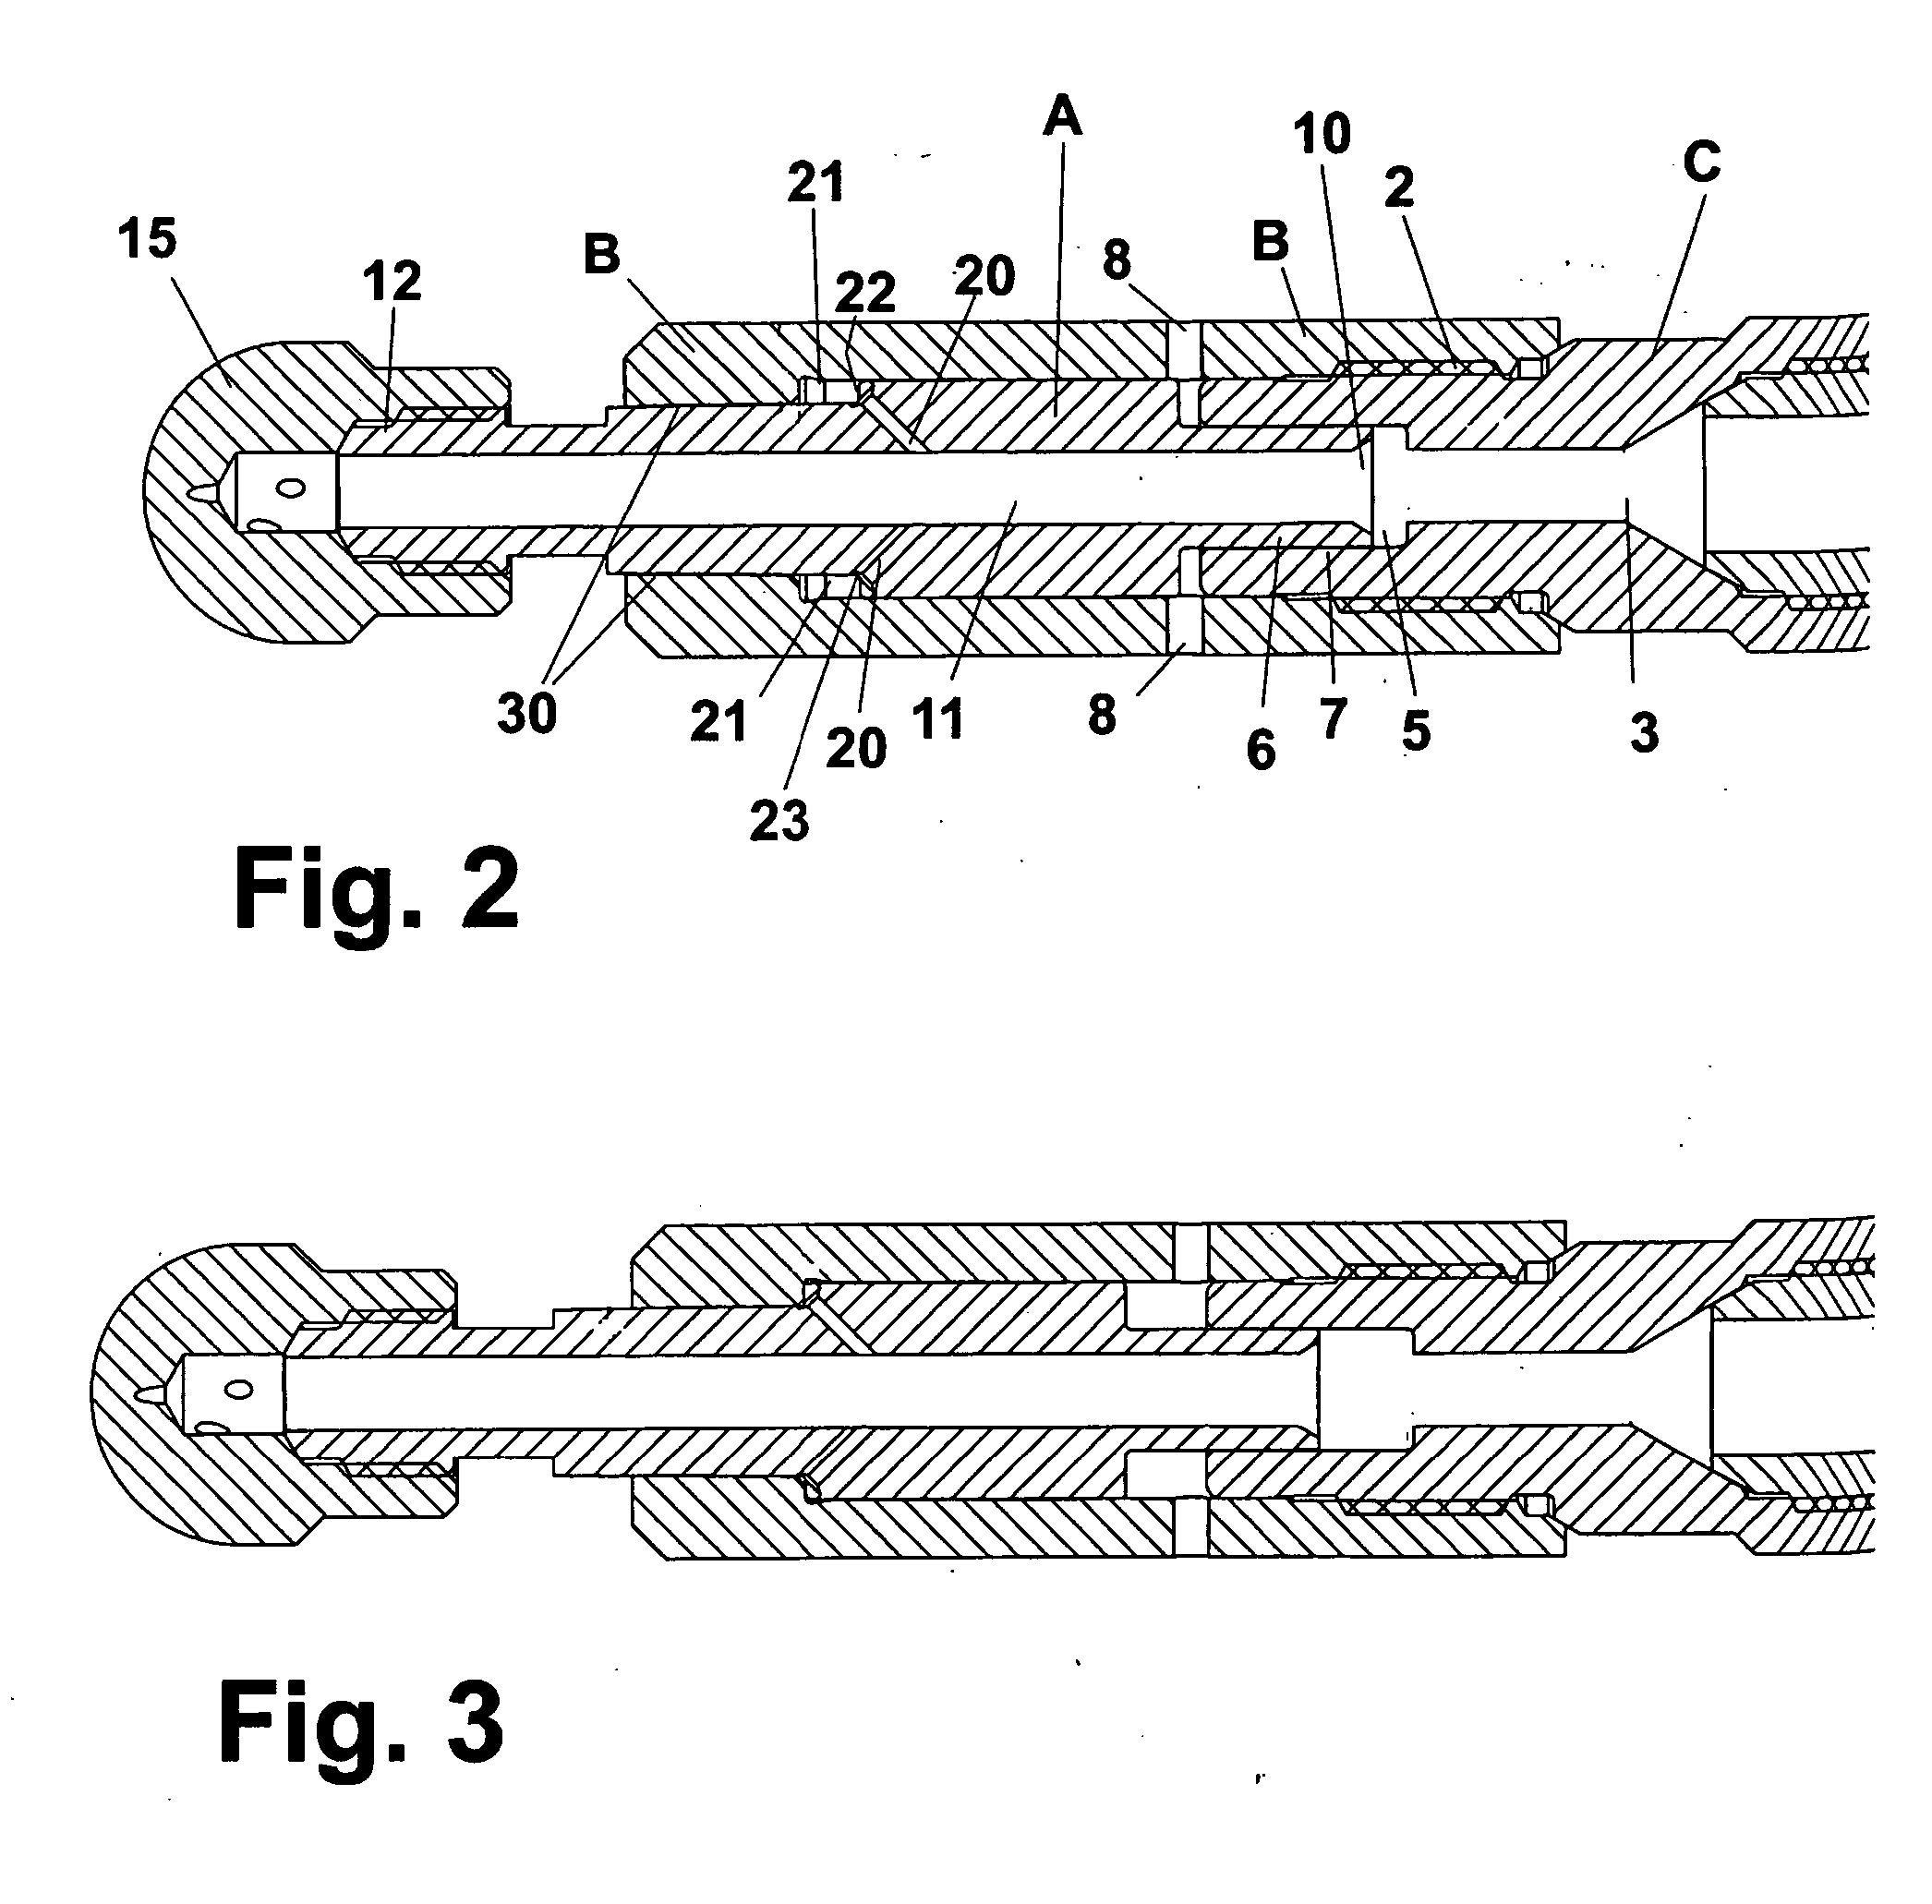 Self regulating fluid bearing high pressure rotary nozzle with balanced thrust force